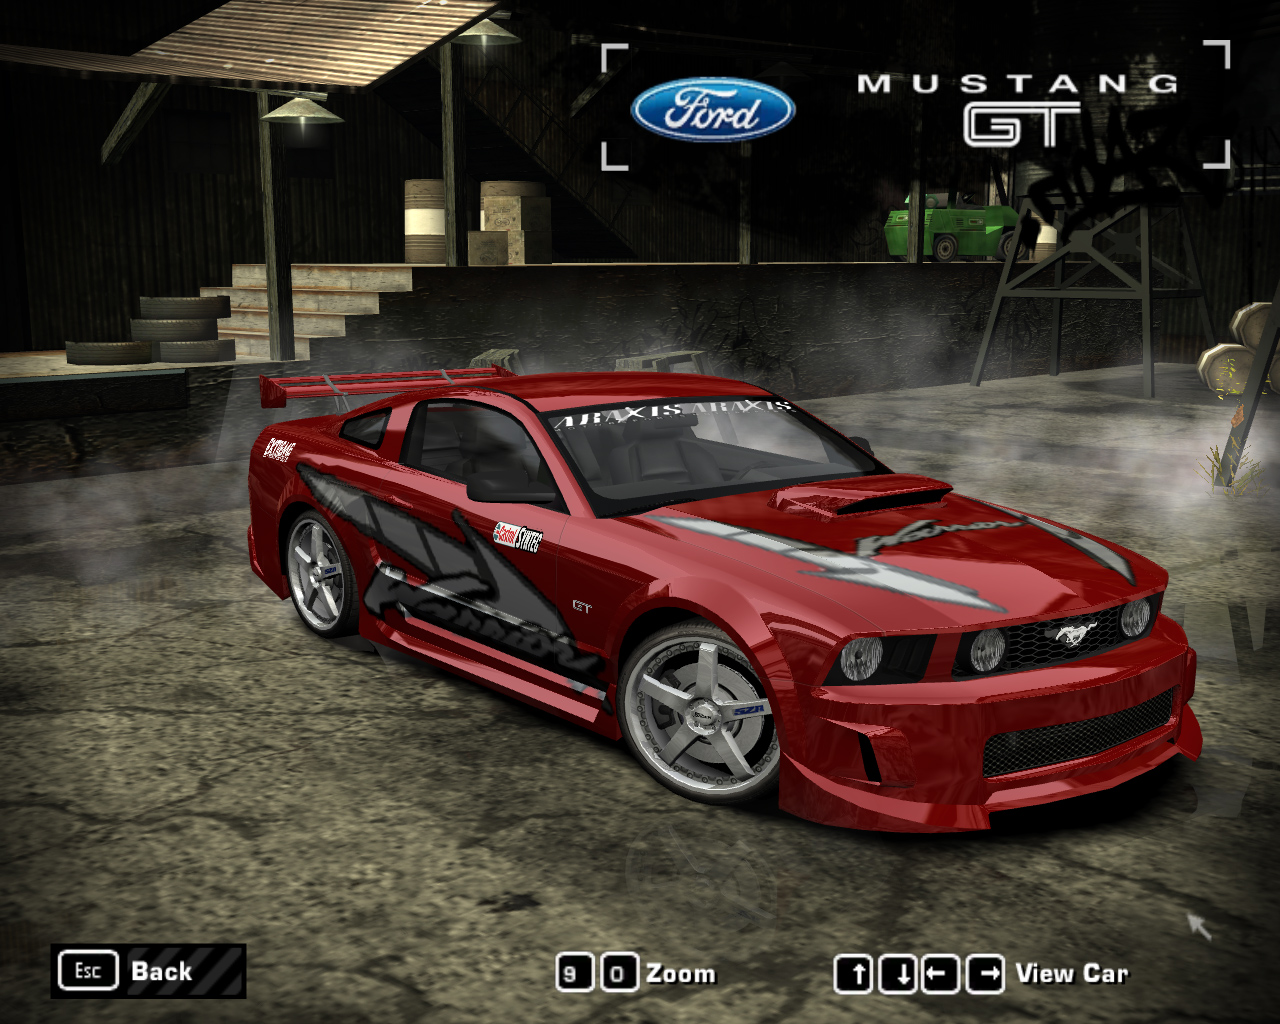 NFSCars | Need For Speed Cars